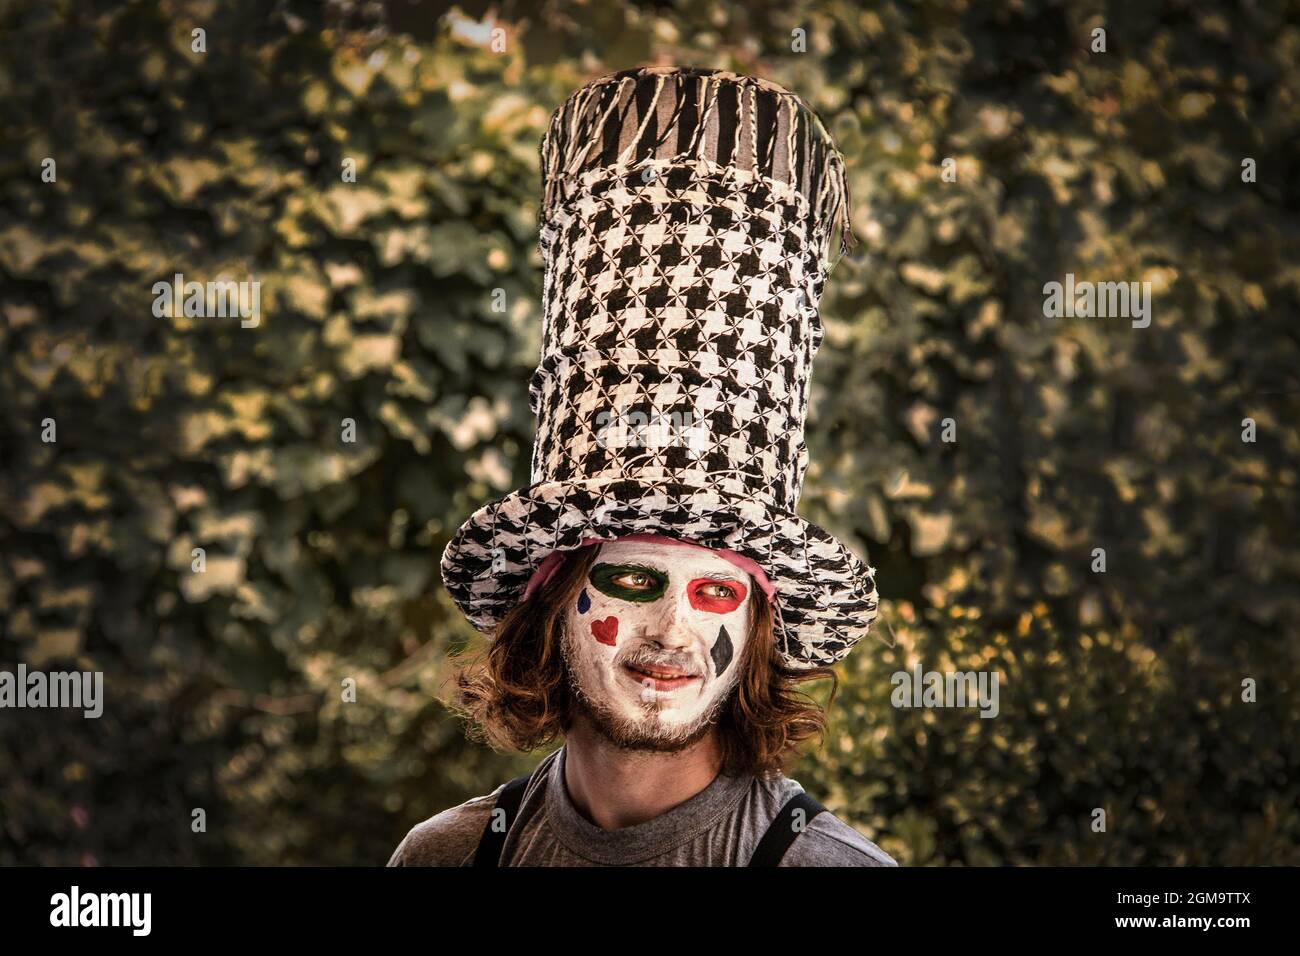 07-01-2019 Tulsa USA - Smiling young maan dressed like the Mad Hatter with painted face against bokeh leaves Stock Photo